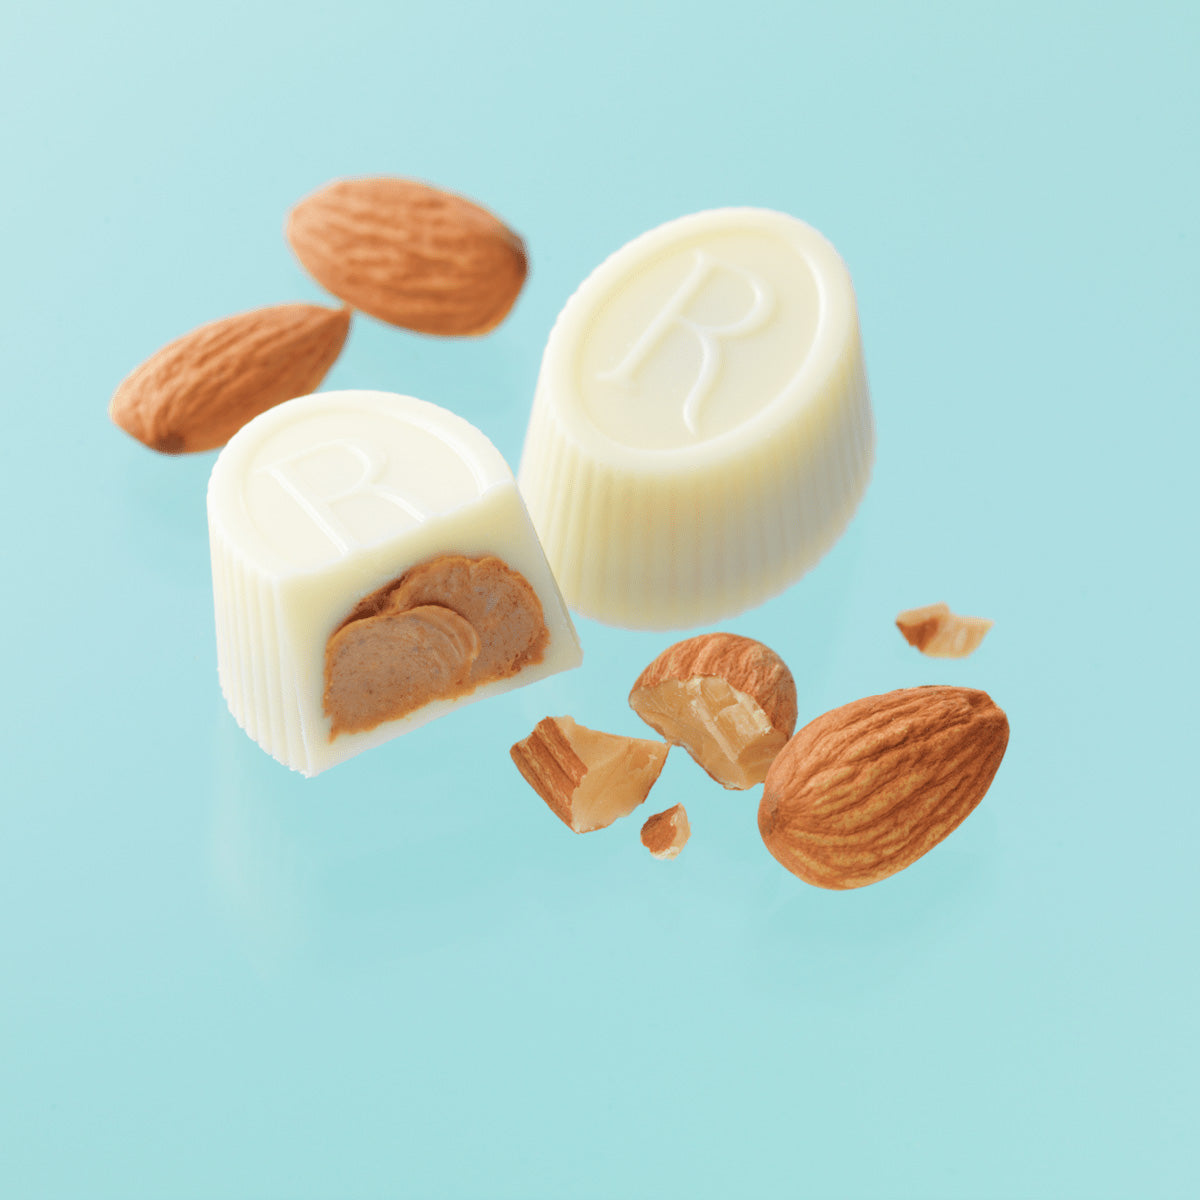 ROYCE' Chocolate - ROYCE' R Chocolat "White Gianduja" - Image shows white chocolate cups filled with a brown cream. Accents are loose almonds. Background is in light blue color.